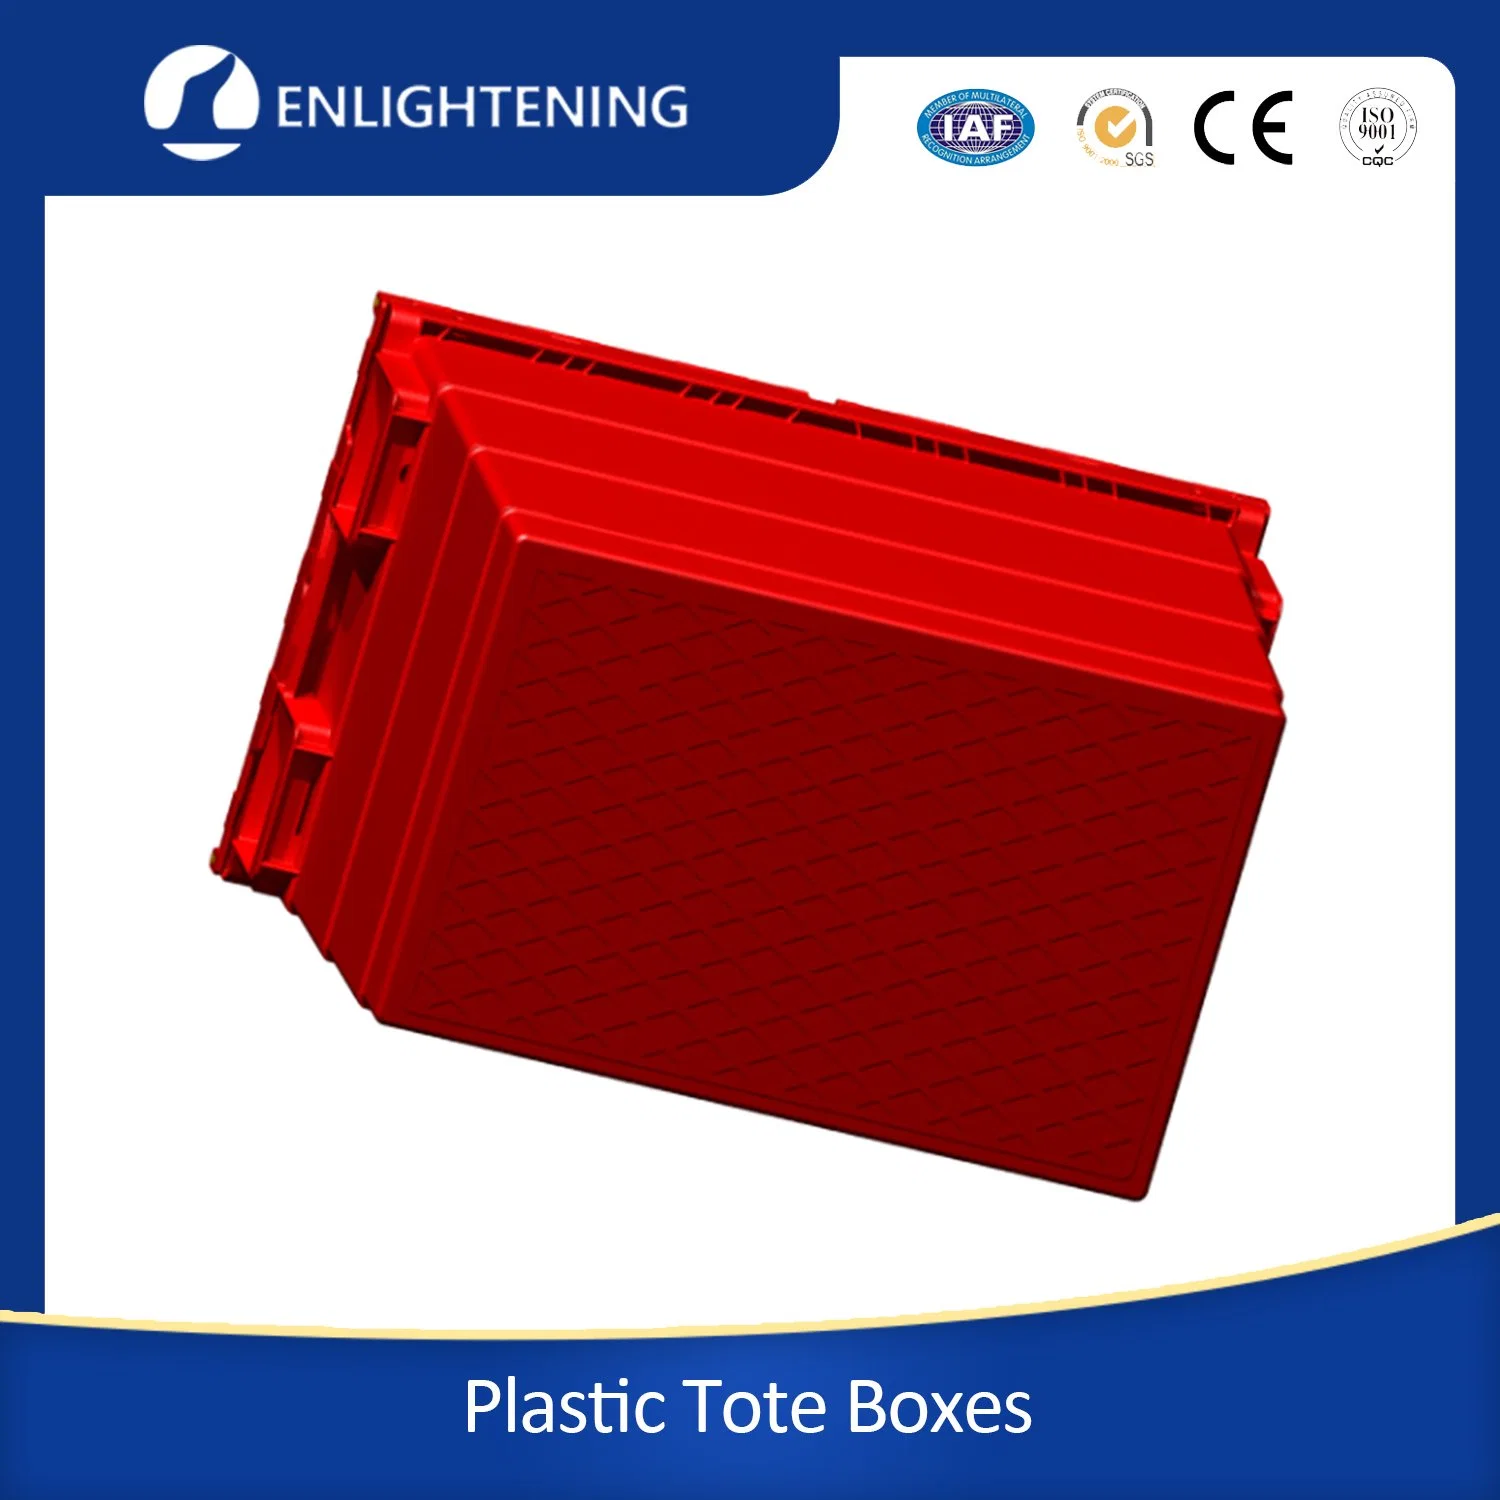 Plastic Durable Use Turnover Box /Hinge Lid Moving Container /Extra Strong Tote Boxesnestable Container Plastic Tote Box for Store storage and Transfer